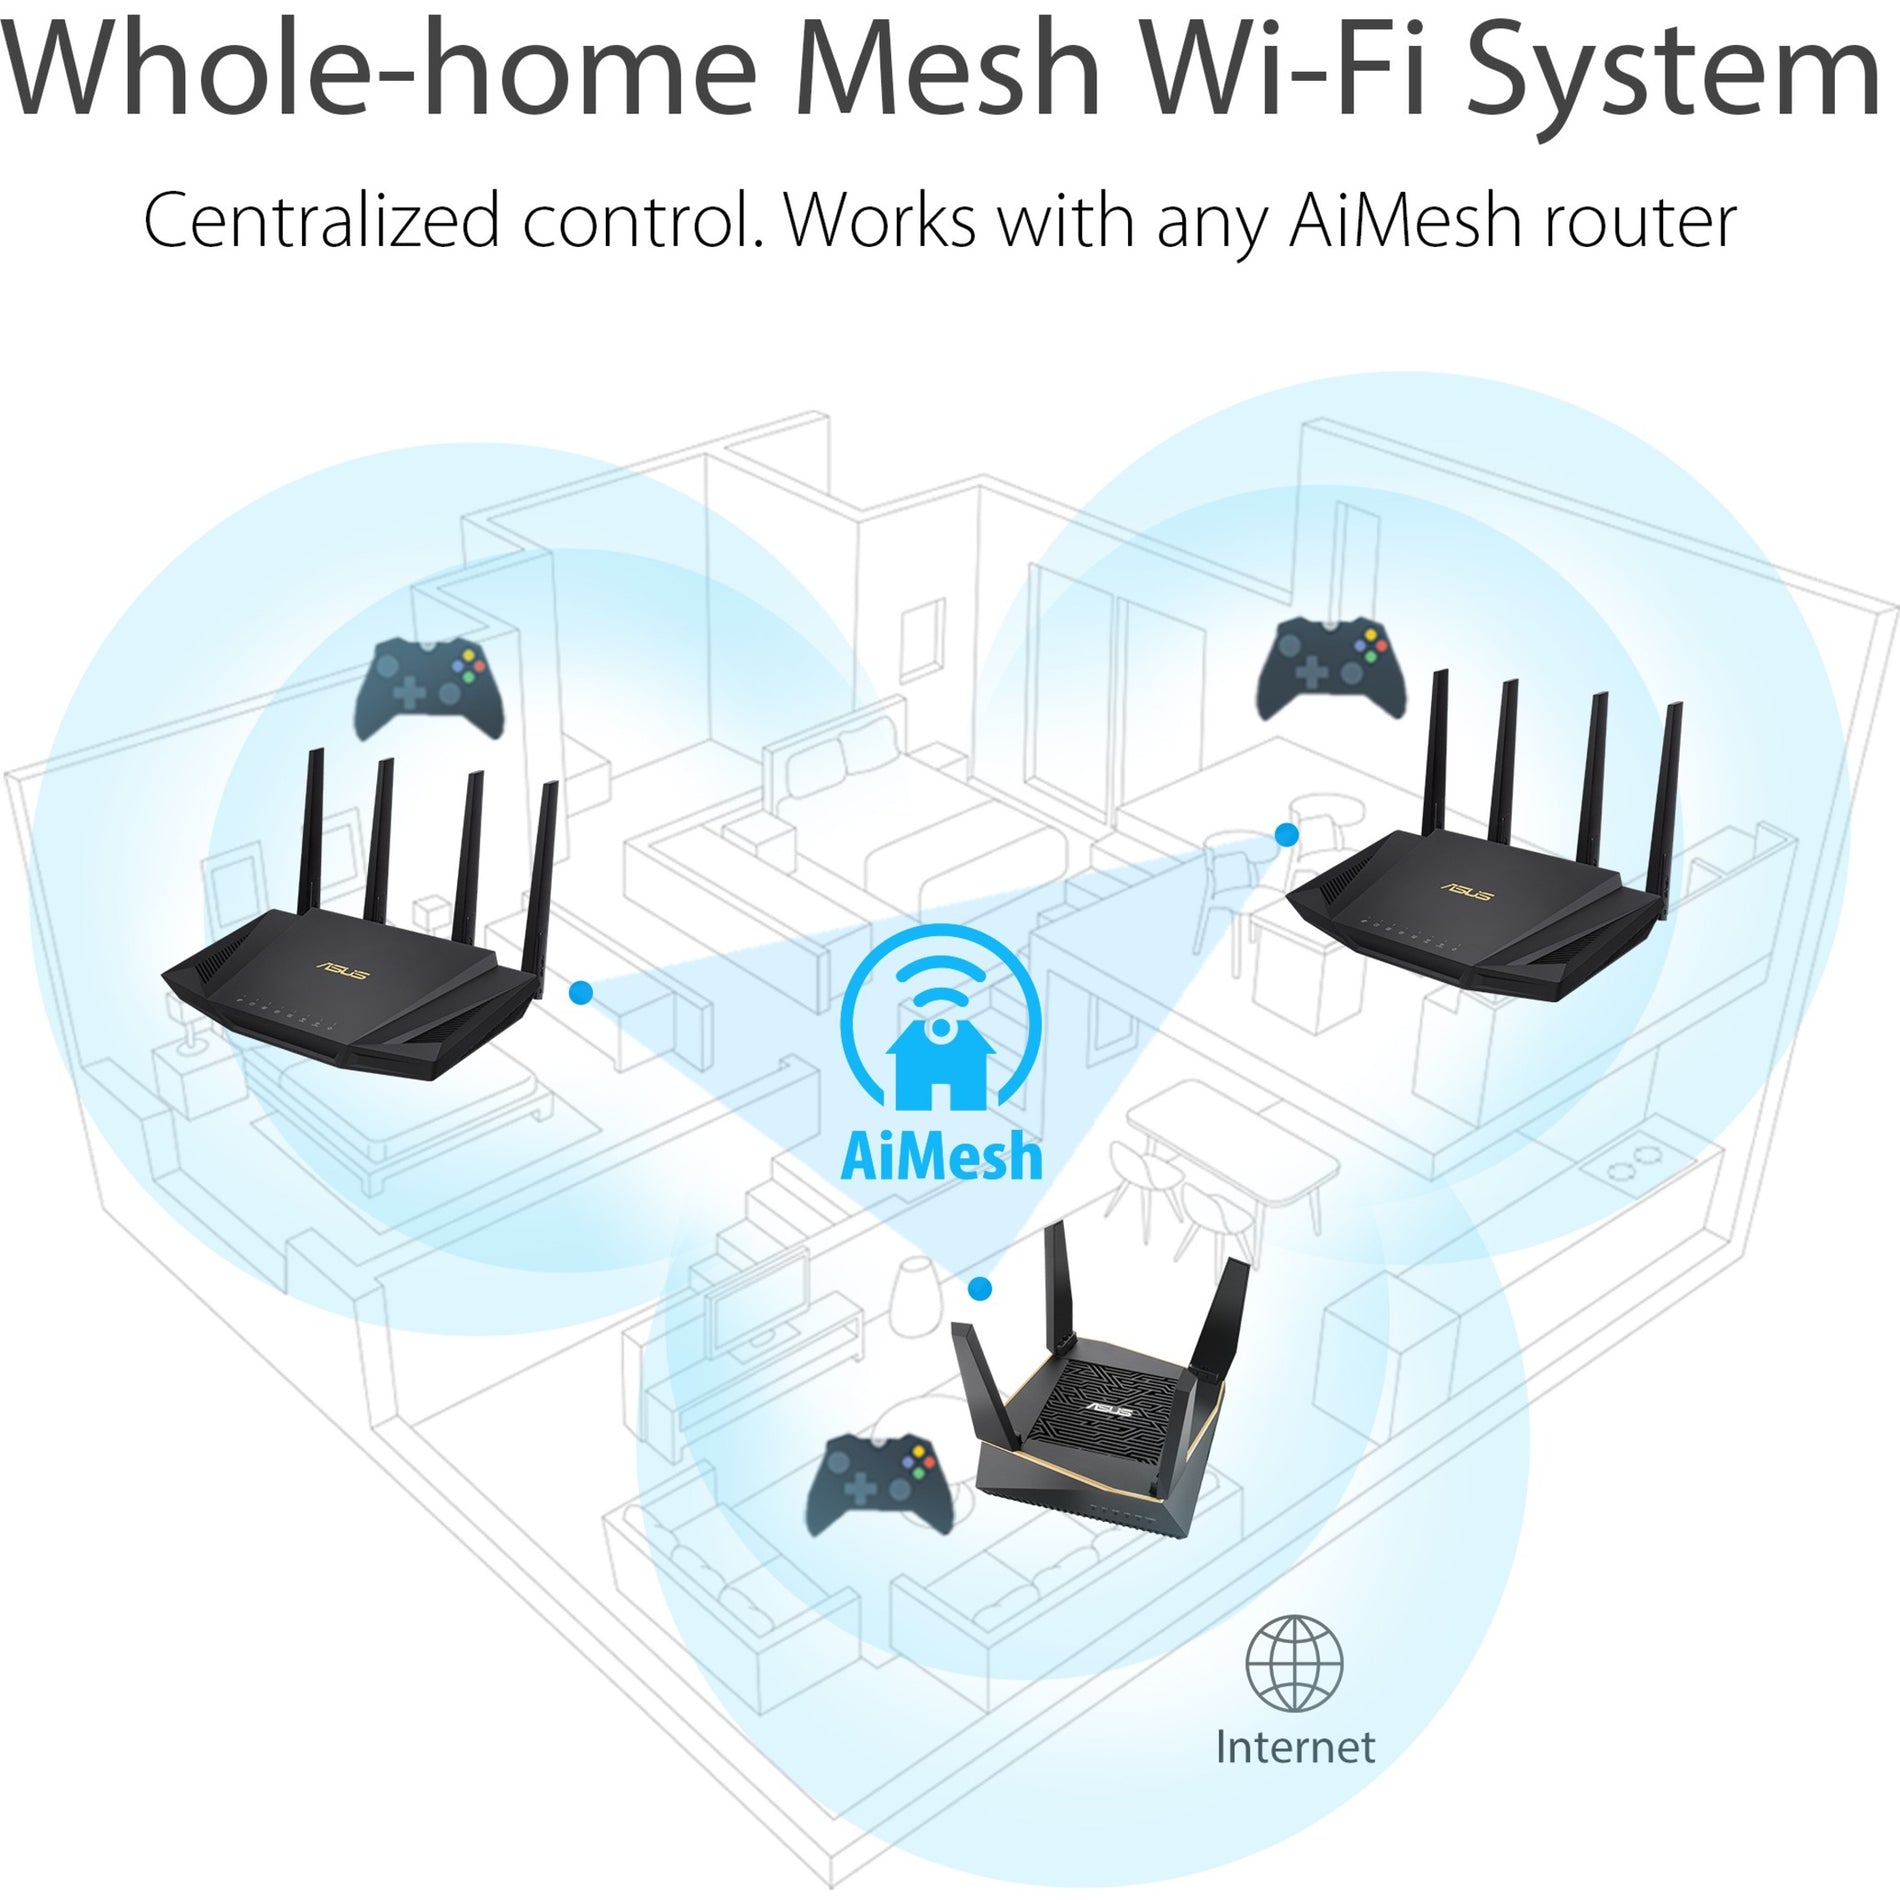 Asus RT-AX3000 AiMesh Wi-Fi 6 Wireless Router, Gigabit Ethernet, USB, VPN Supported